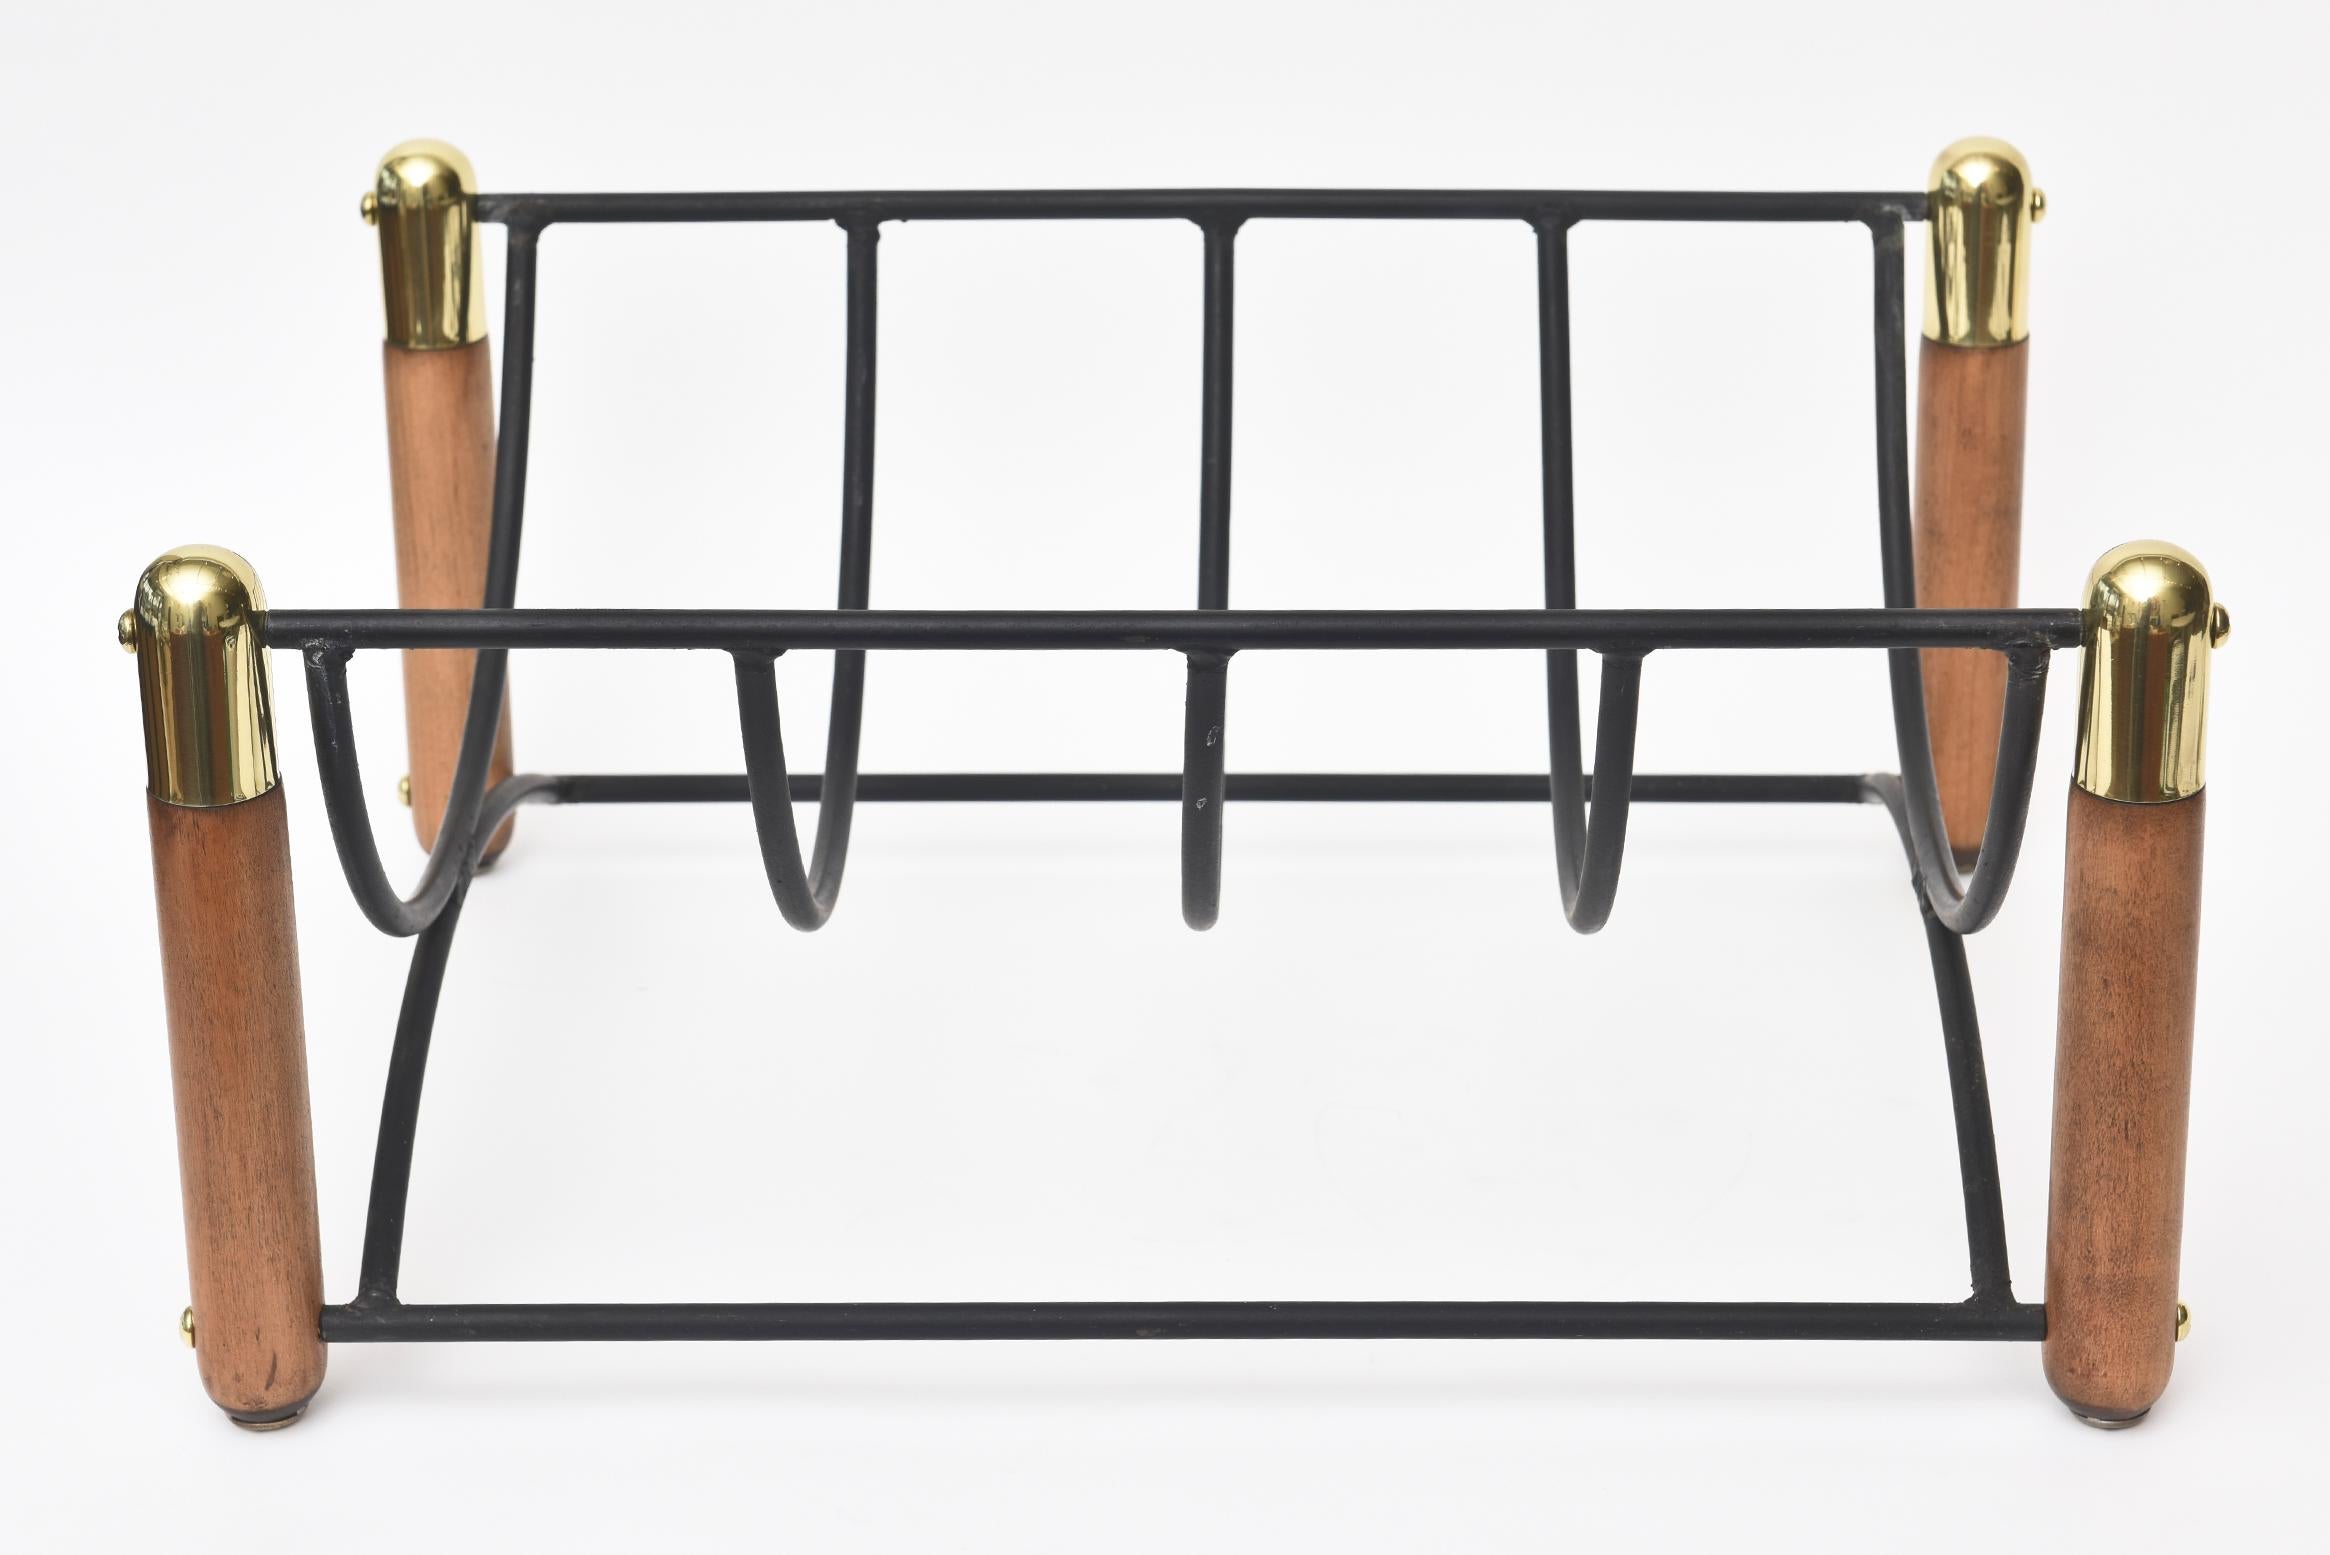 This Mid-Century Modern vintage brass, wood and black iron magazine stand or rack and or log carrier for a fireplace is handsome and very utilitarian. it serves as a Dual purpose for logs or magazines. The brass has been polished and the wood was